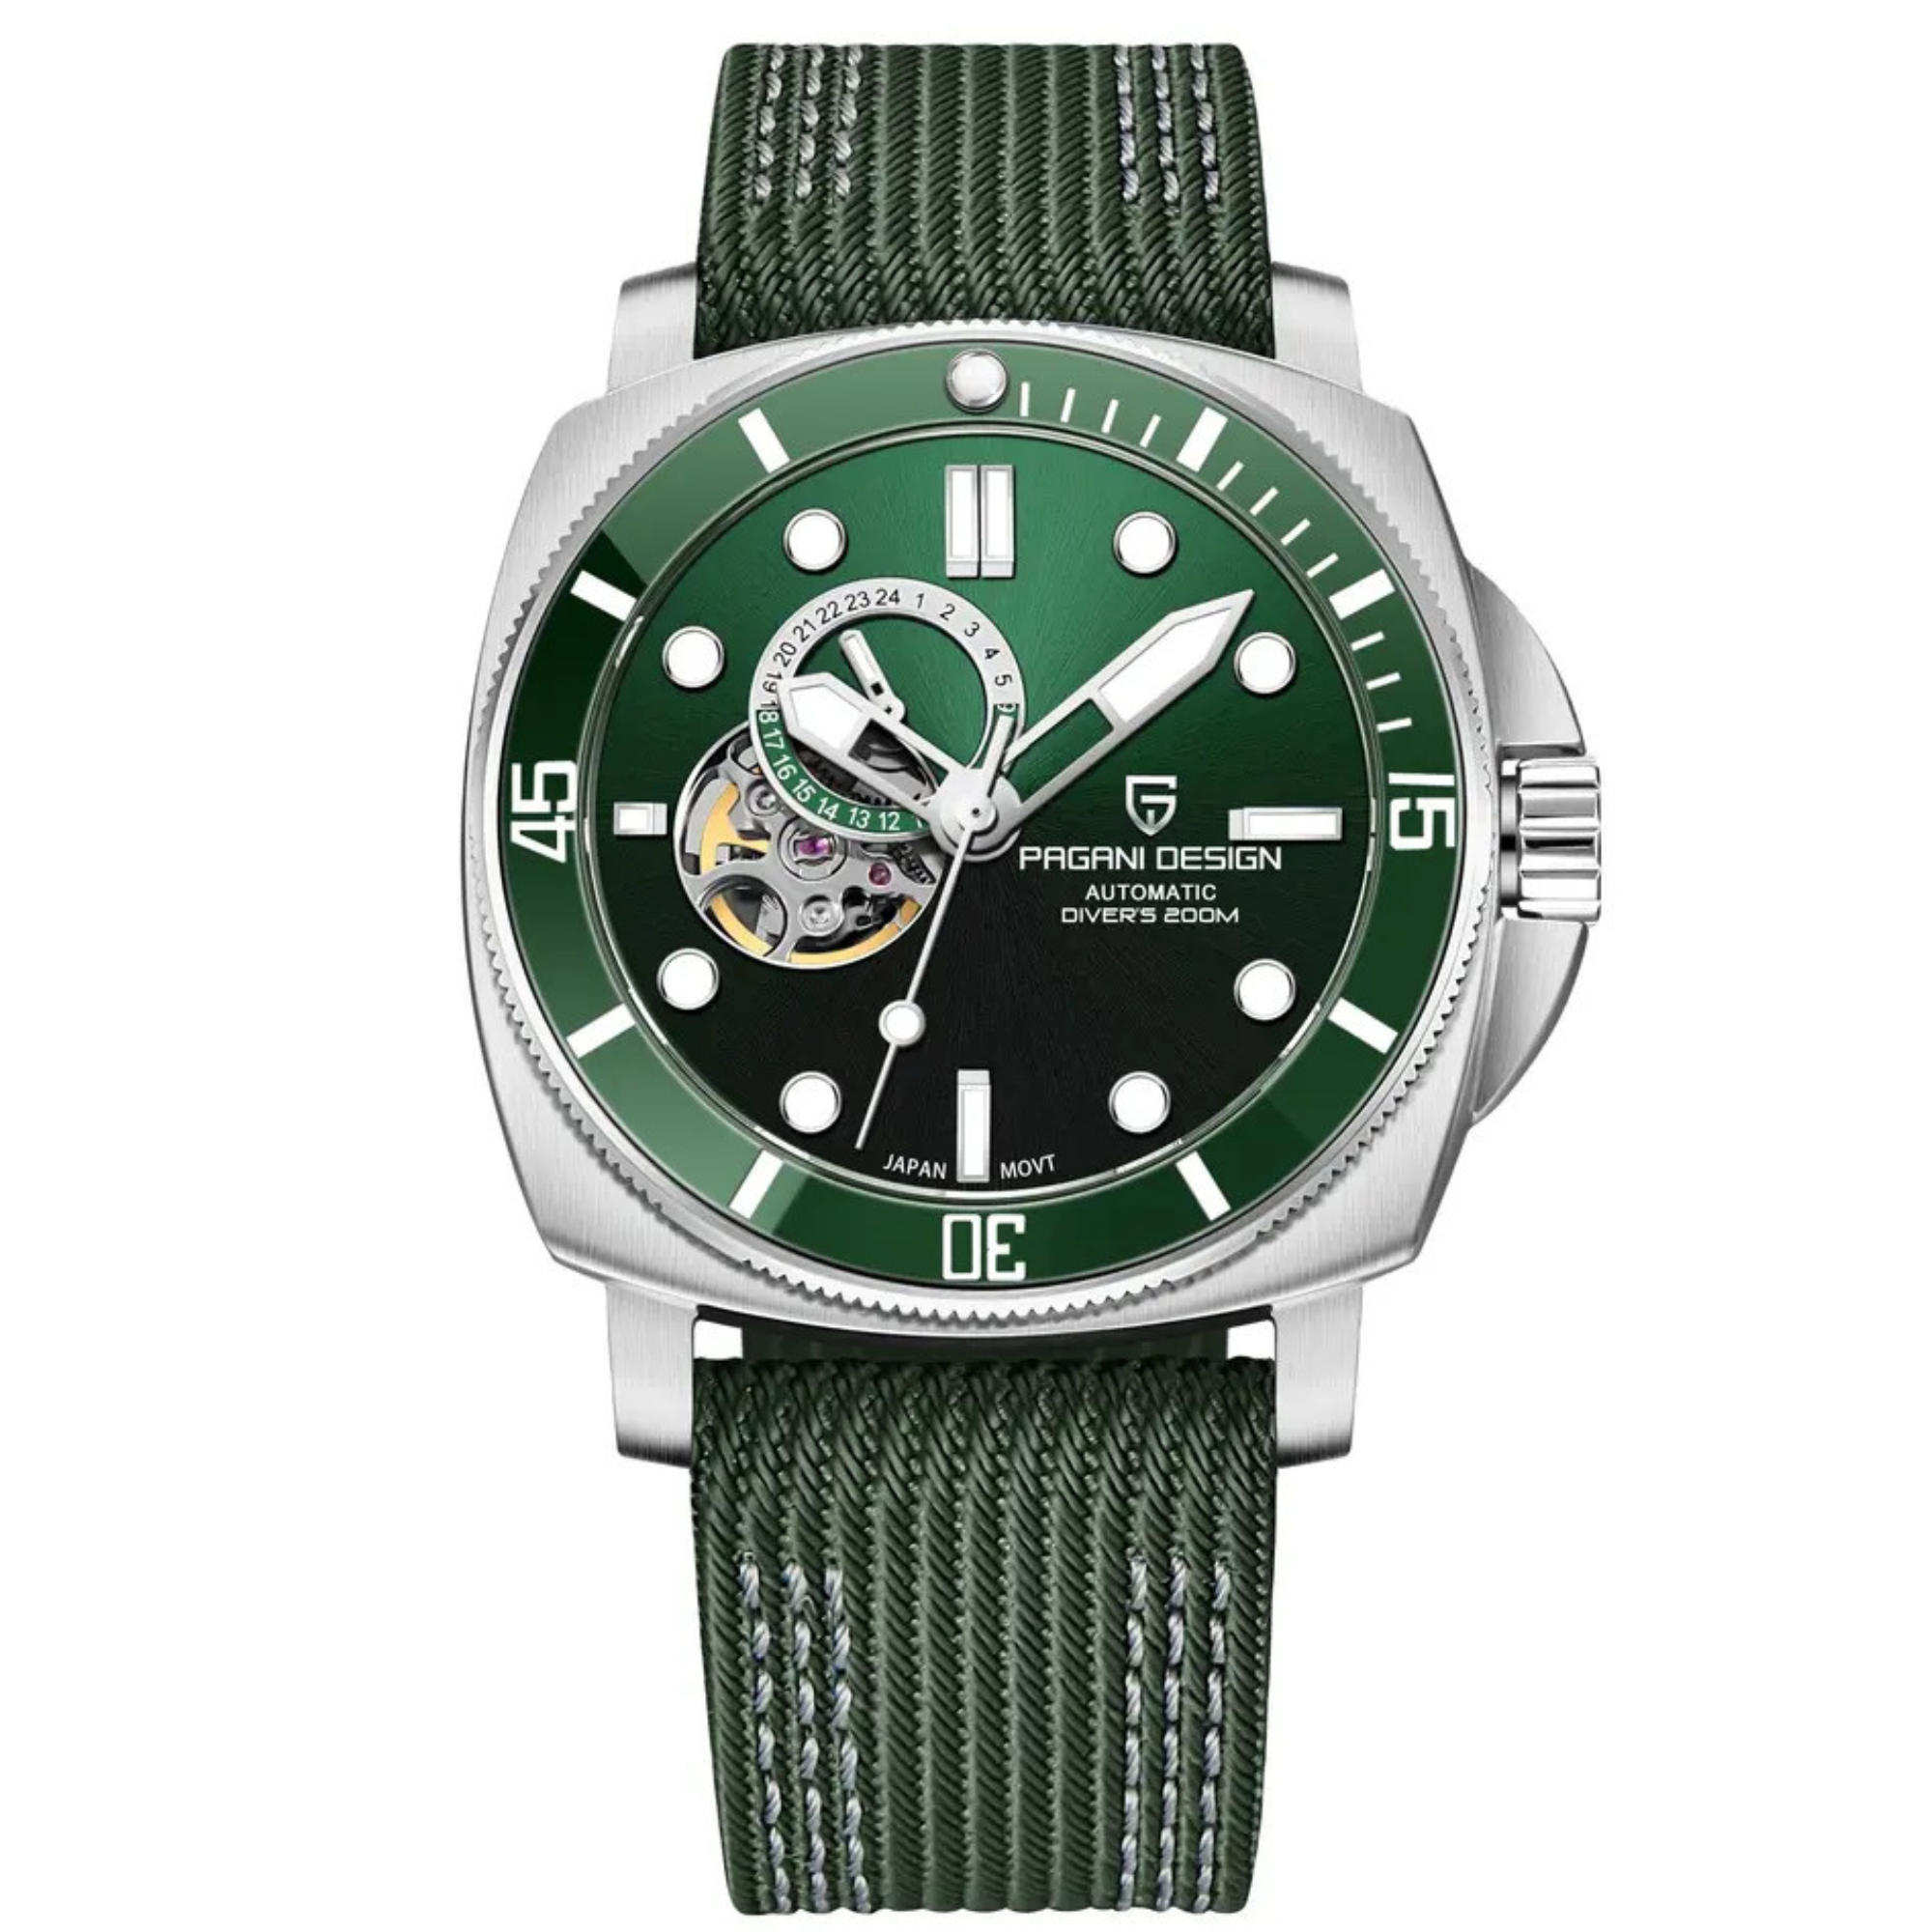 Pagani Design PD-1736 Mechanical Automatic Stainless Steel Men's 43MM Watch (Green Dial)